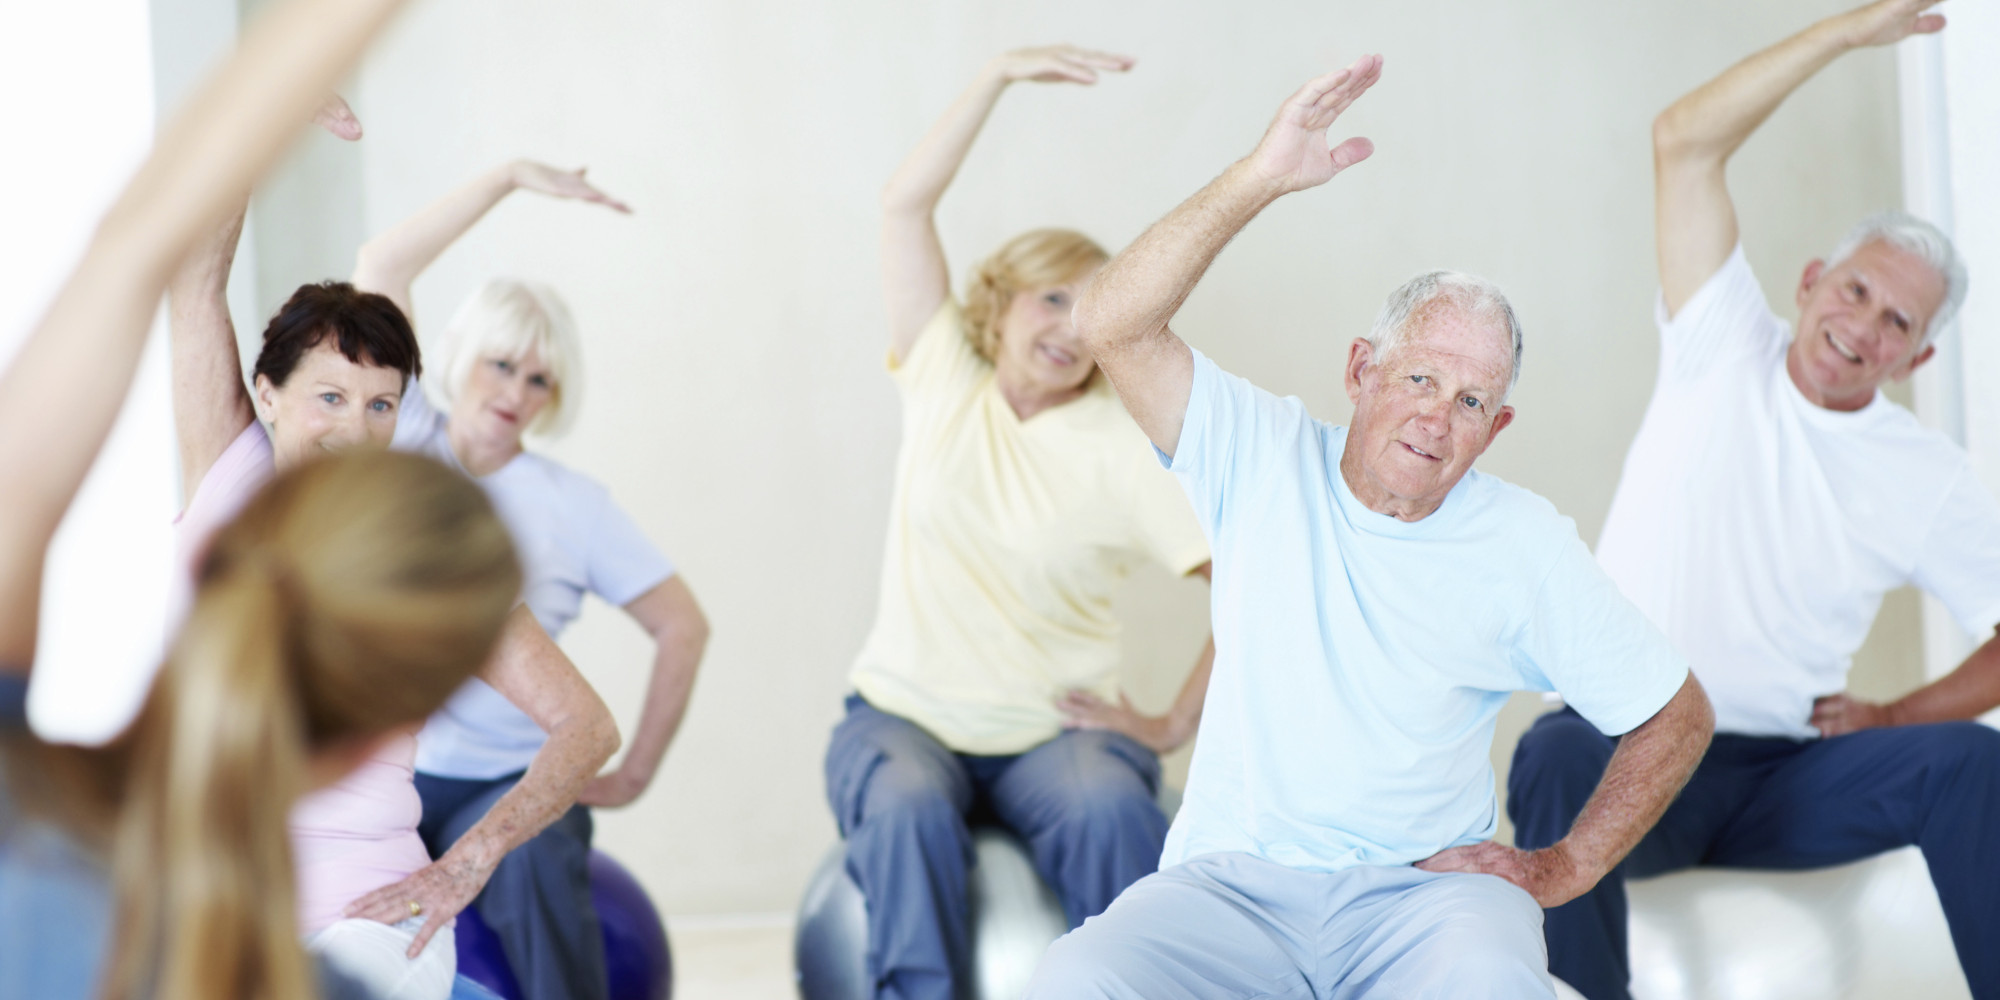 Seniors Exercise in Chairs Google image from http://www.inspirationalfurniture.com/singleimages/senior-citizen-exercises-vpeced4w0rrehjlp.jpg